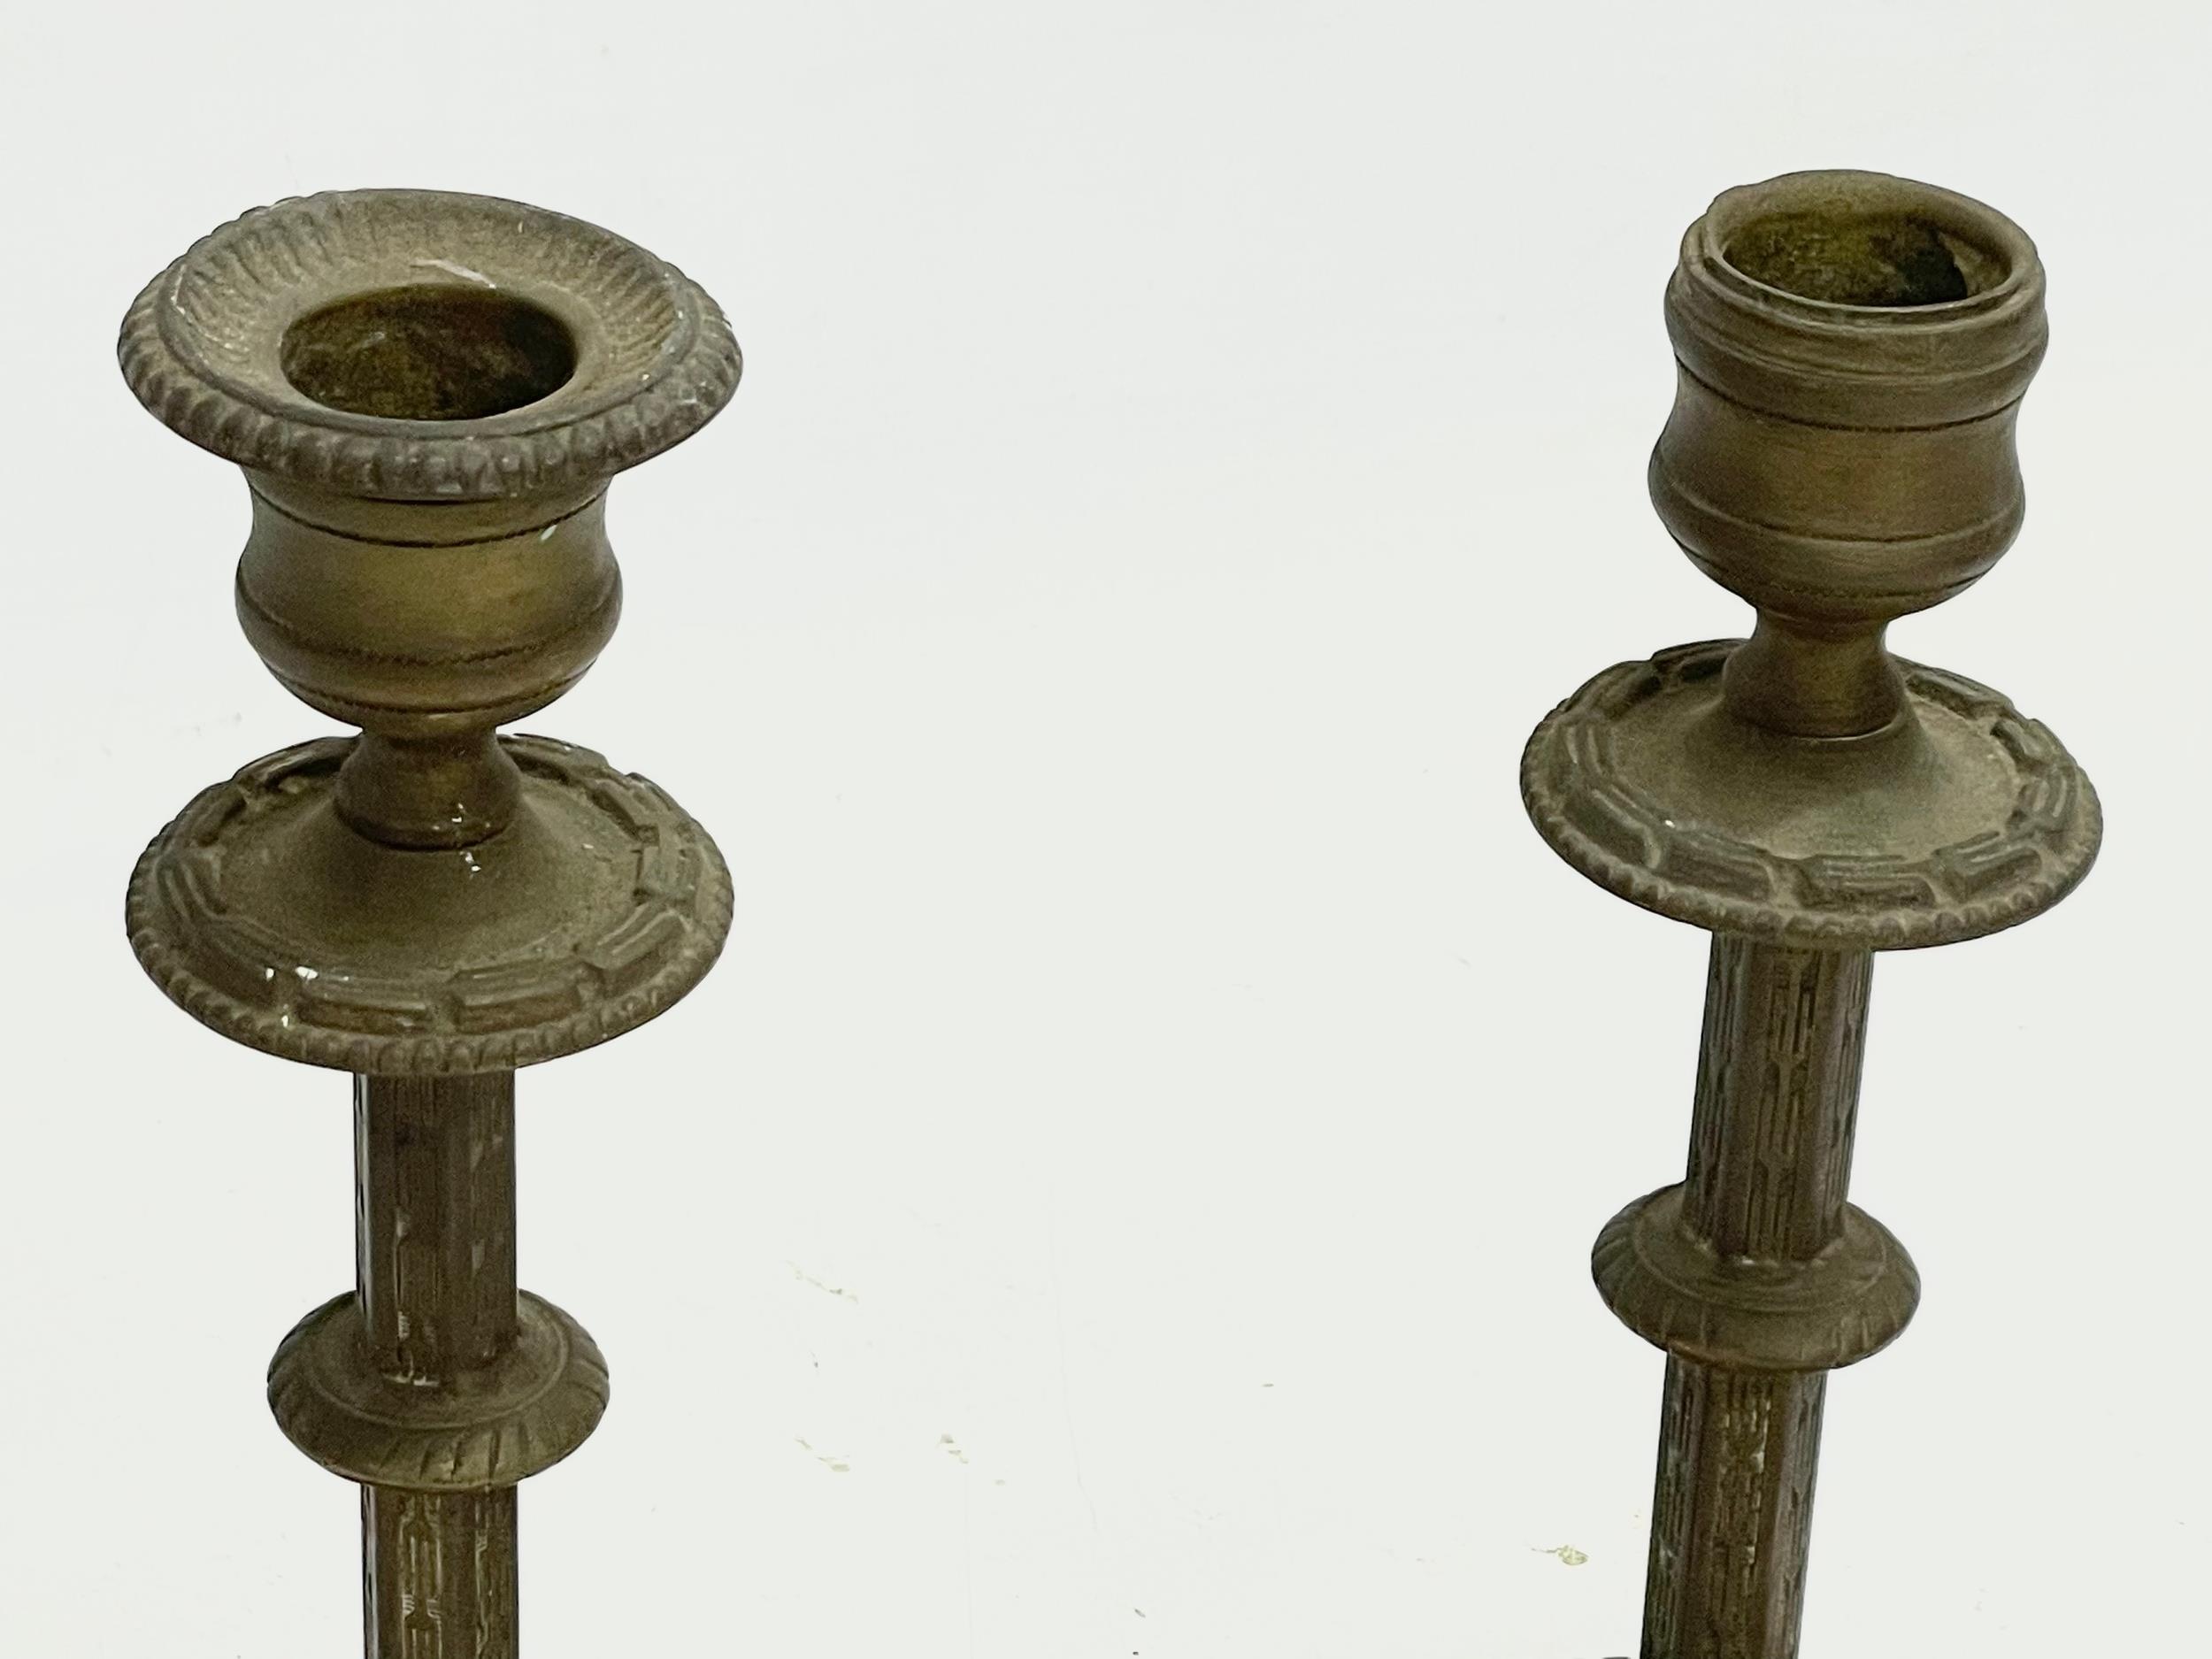 A 19th century spelter bust on stand with a pair of late 19th century brass candlesticks. Bust - Image 4 of 6